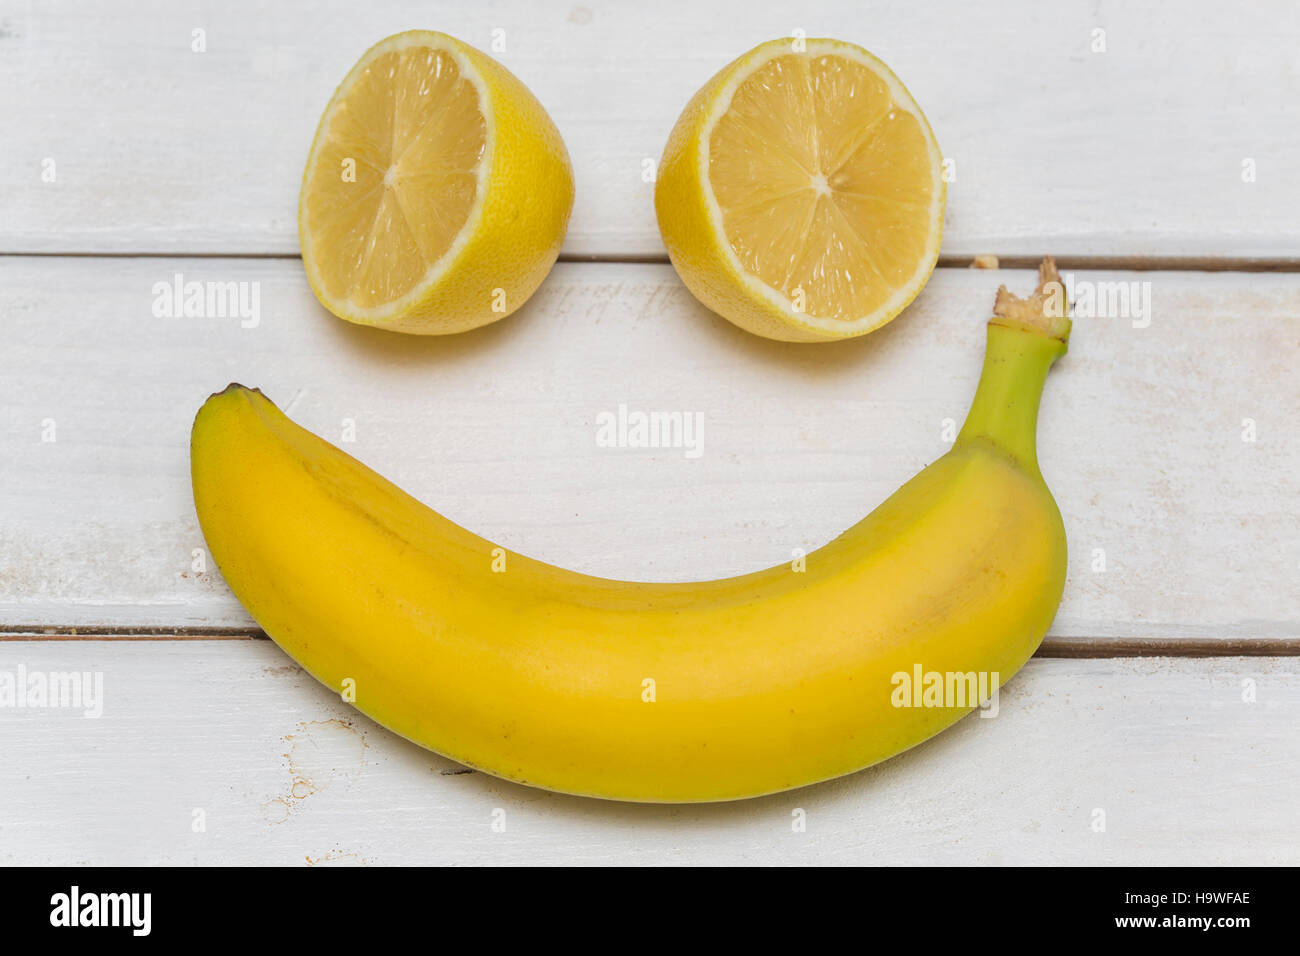 Fruits set as a smiling face isolated on the table Stock Photo